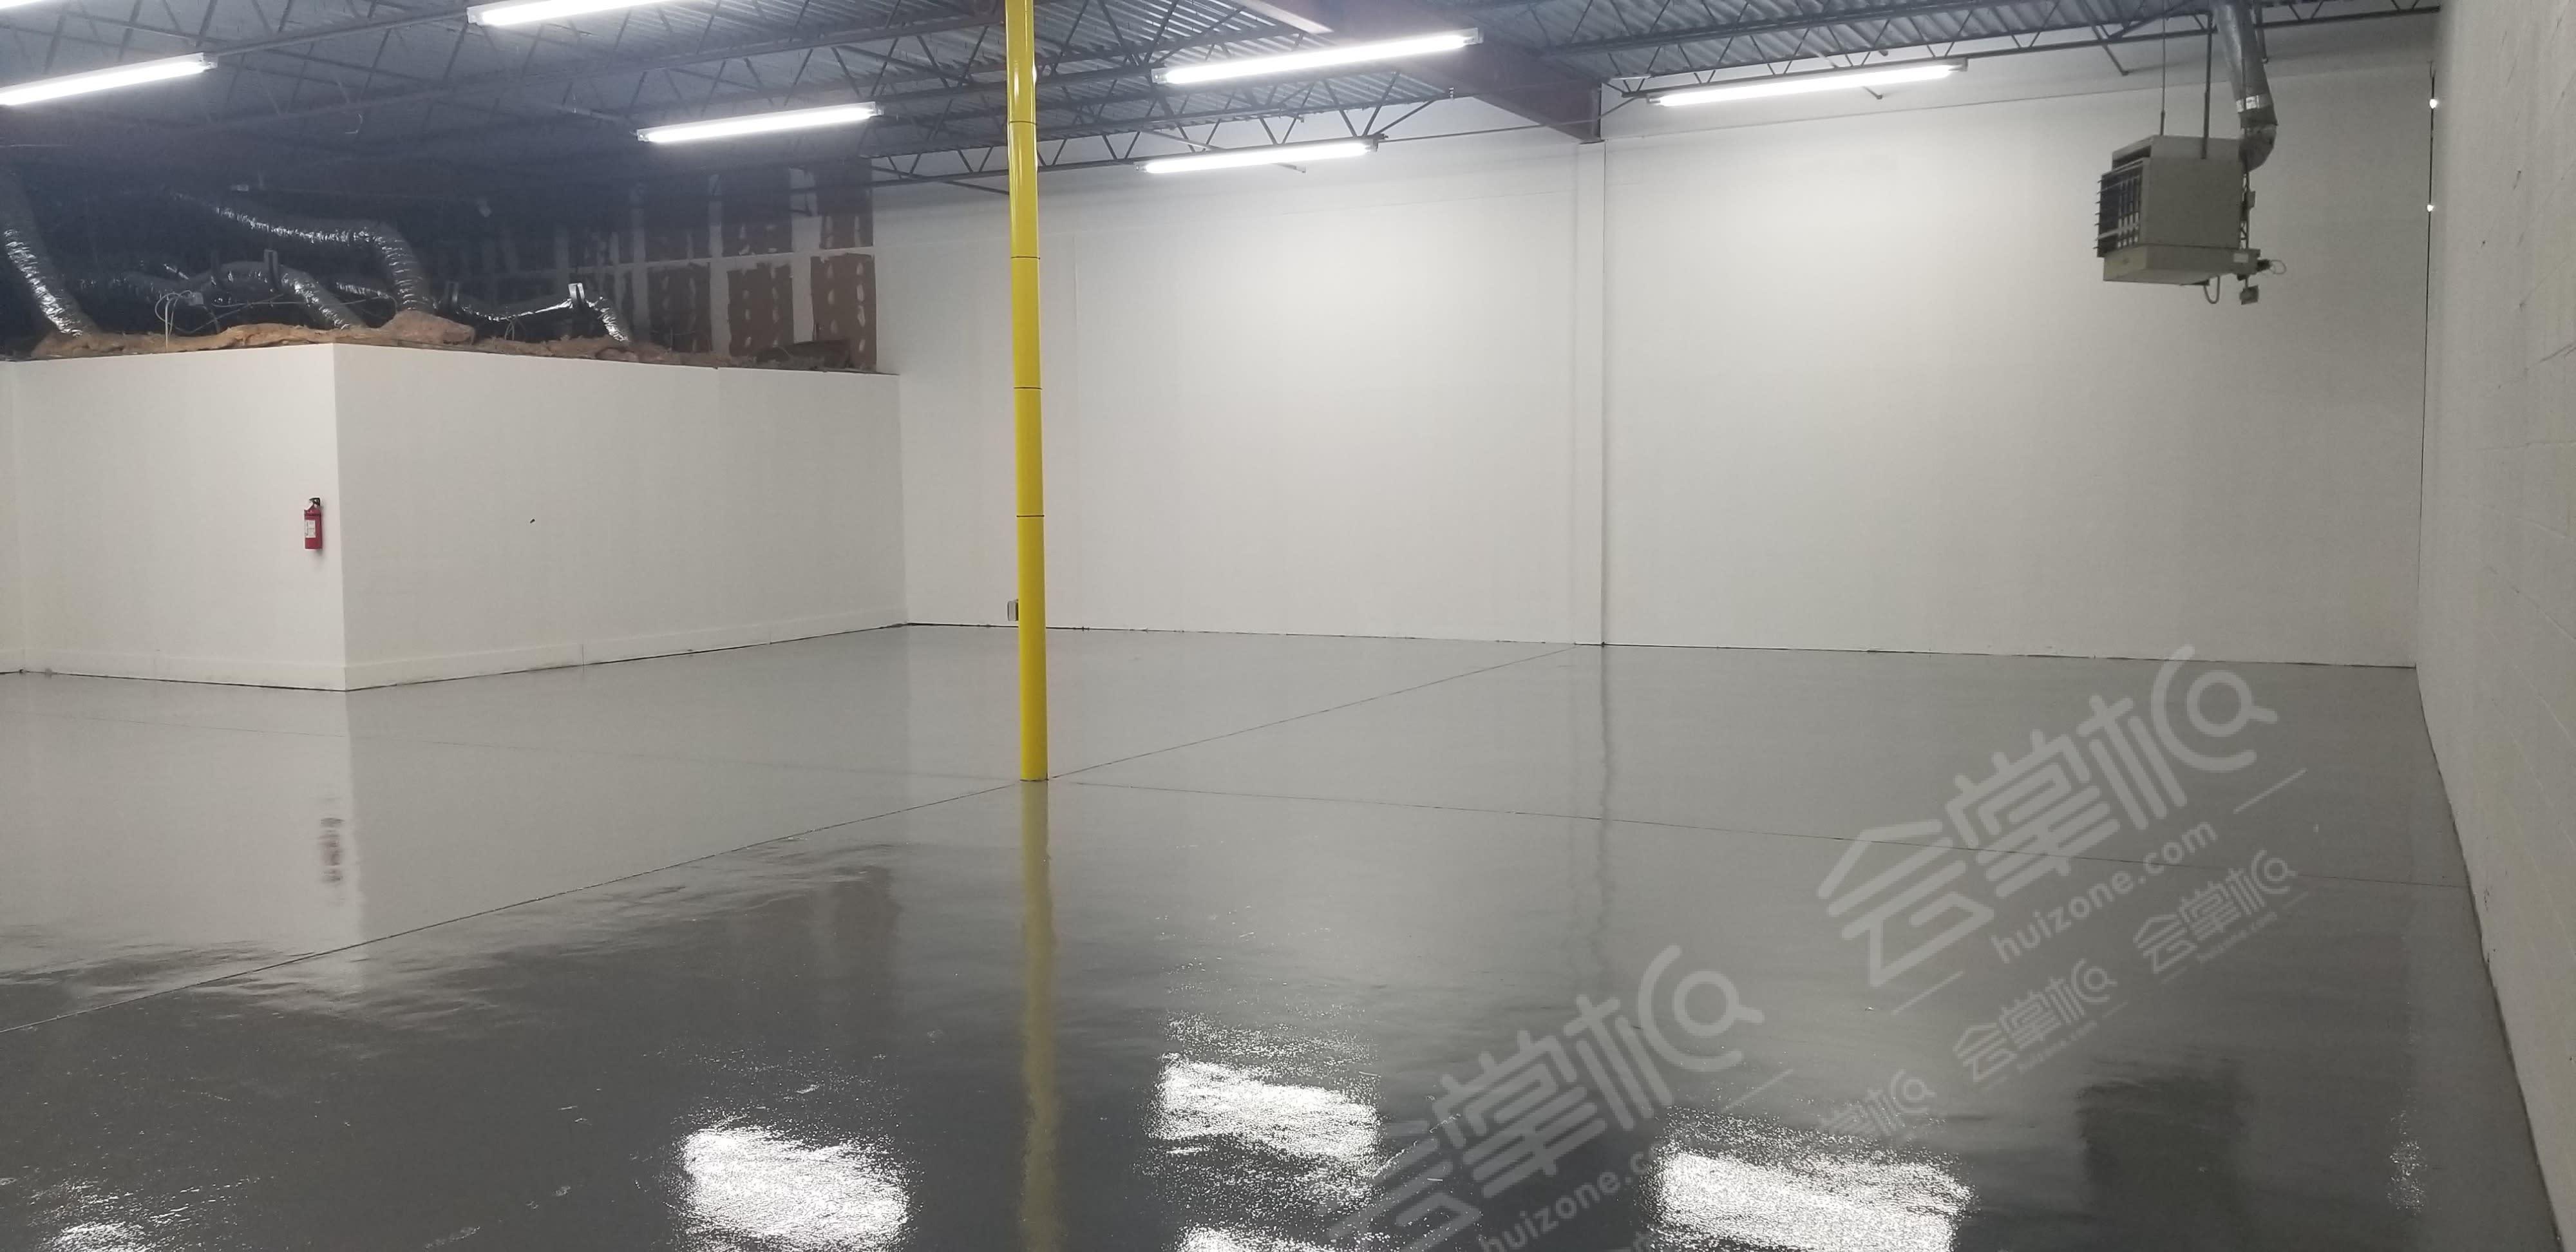 Warehouse for Events with Moveable Walls, Arlington Entertainment District